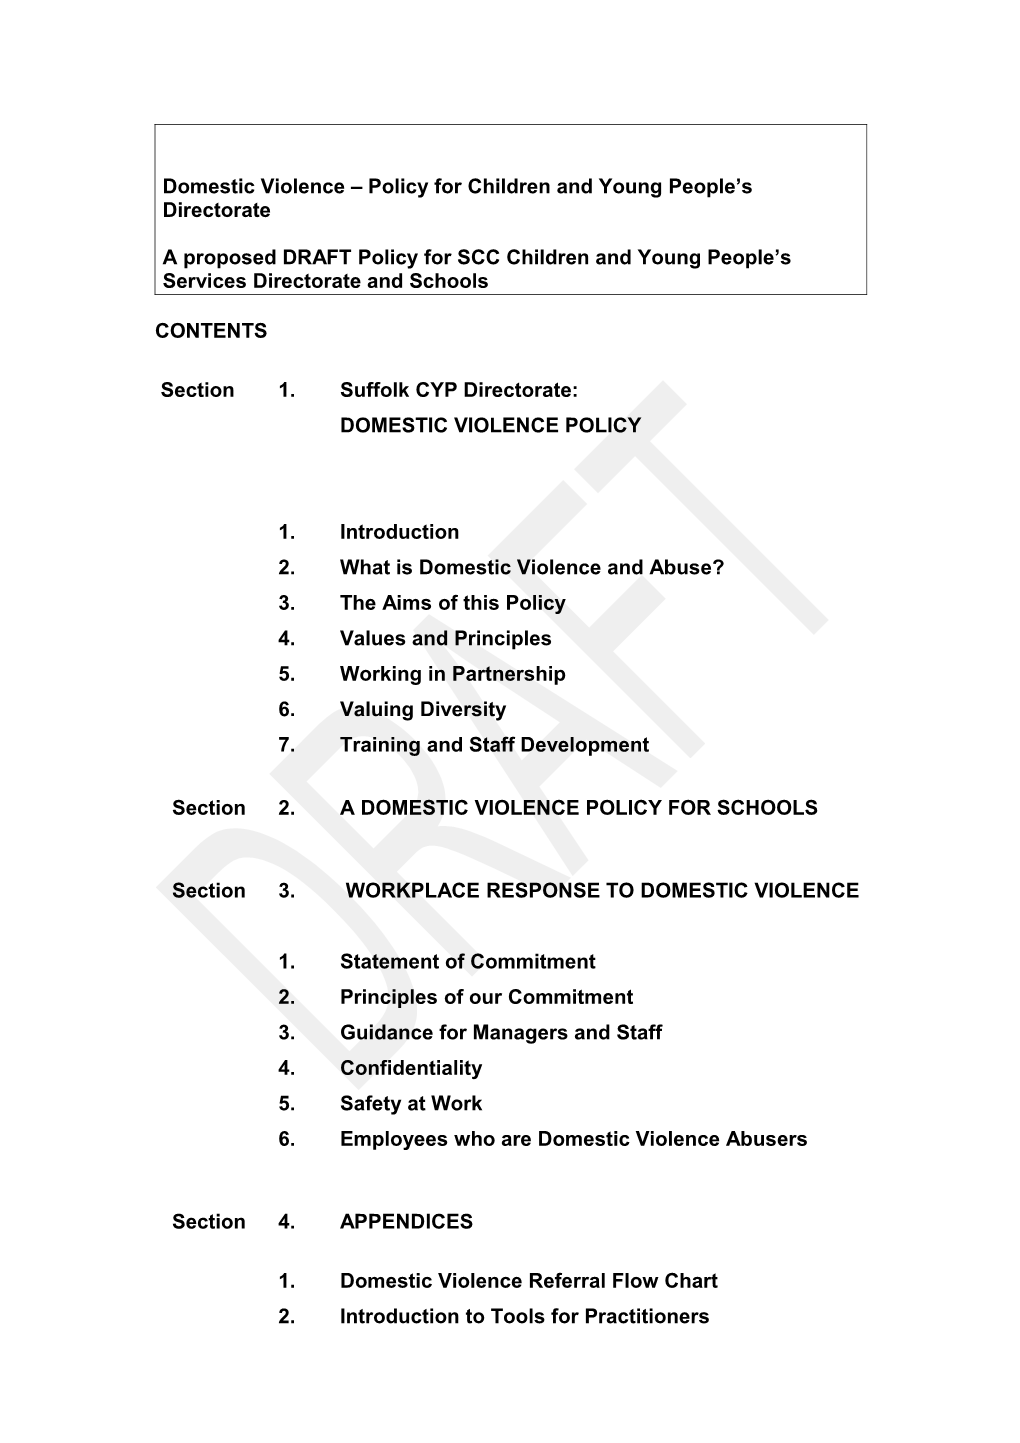 Proposed DRAFT Policy for SCC Children and Young People S Services Directorate